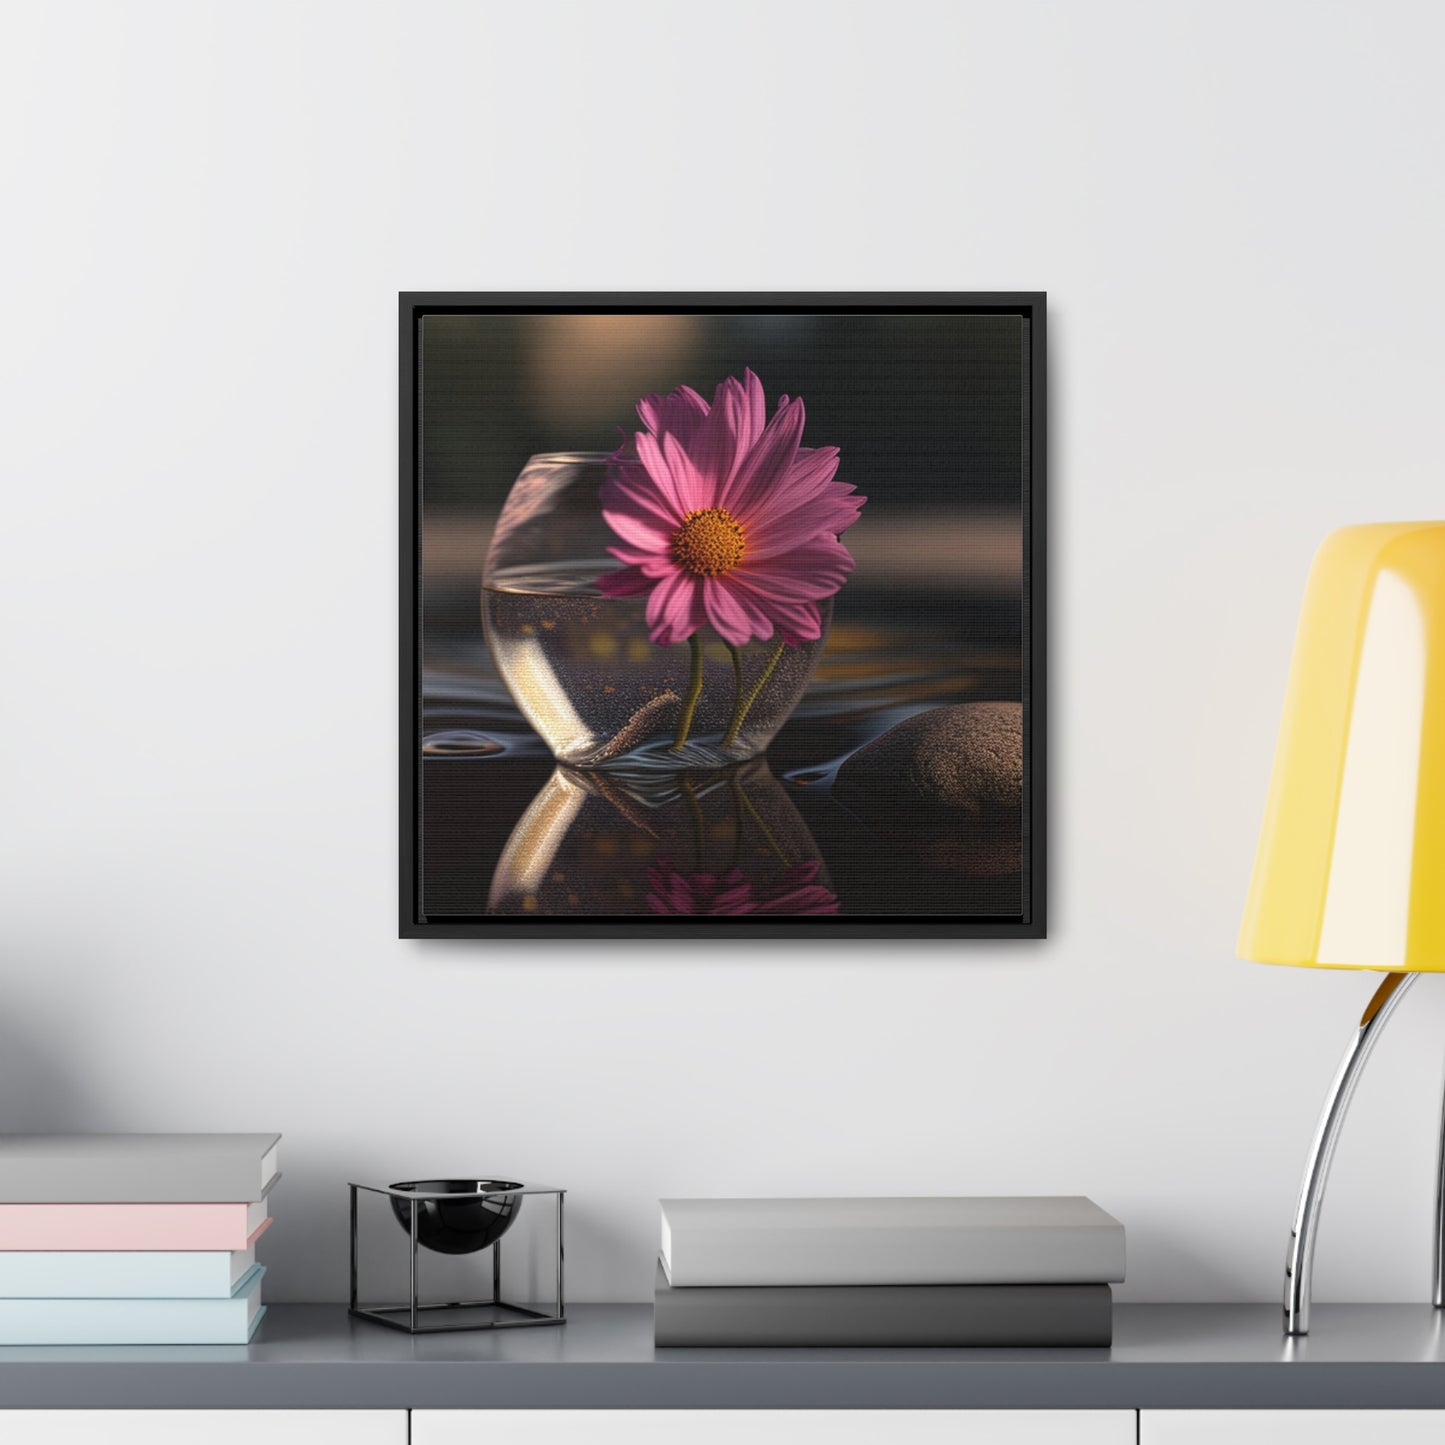 Gallery Canvas Wraps, Square Frame Pink Daisy 4